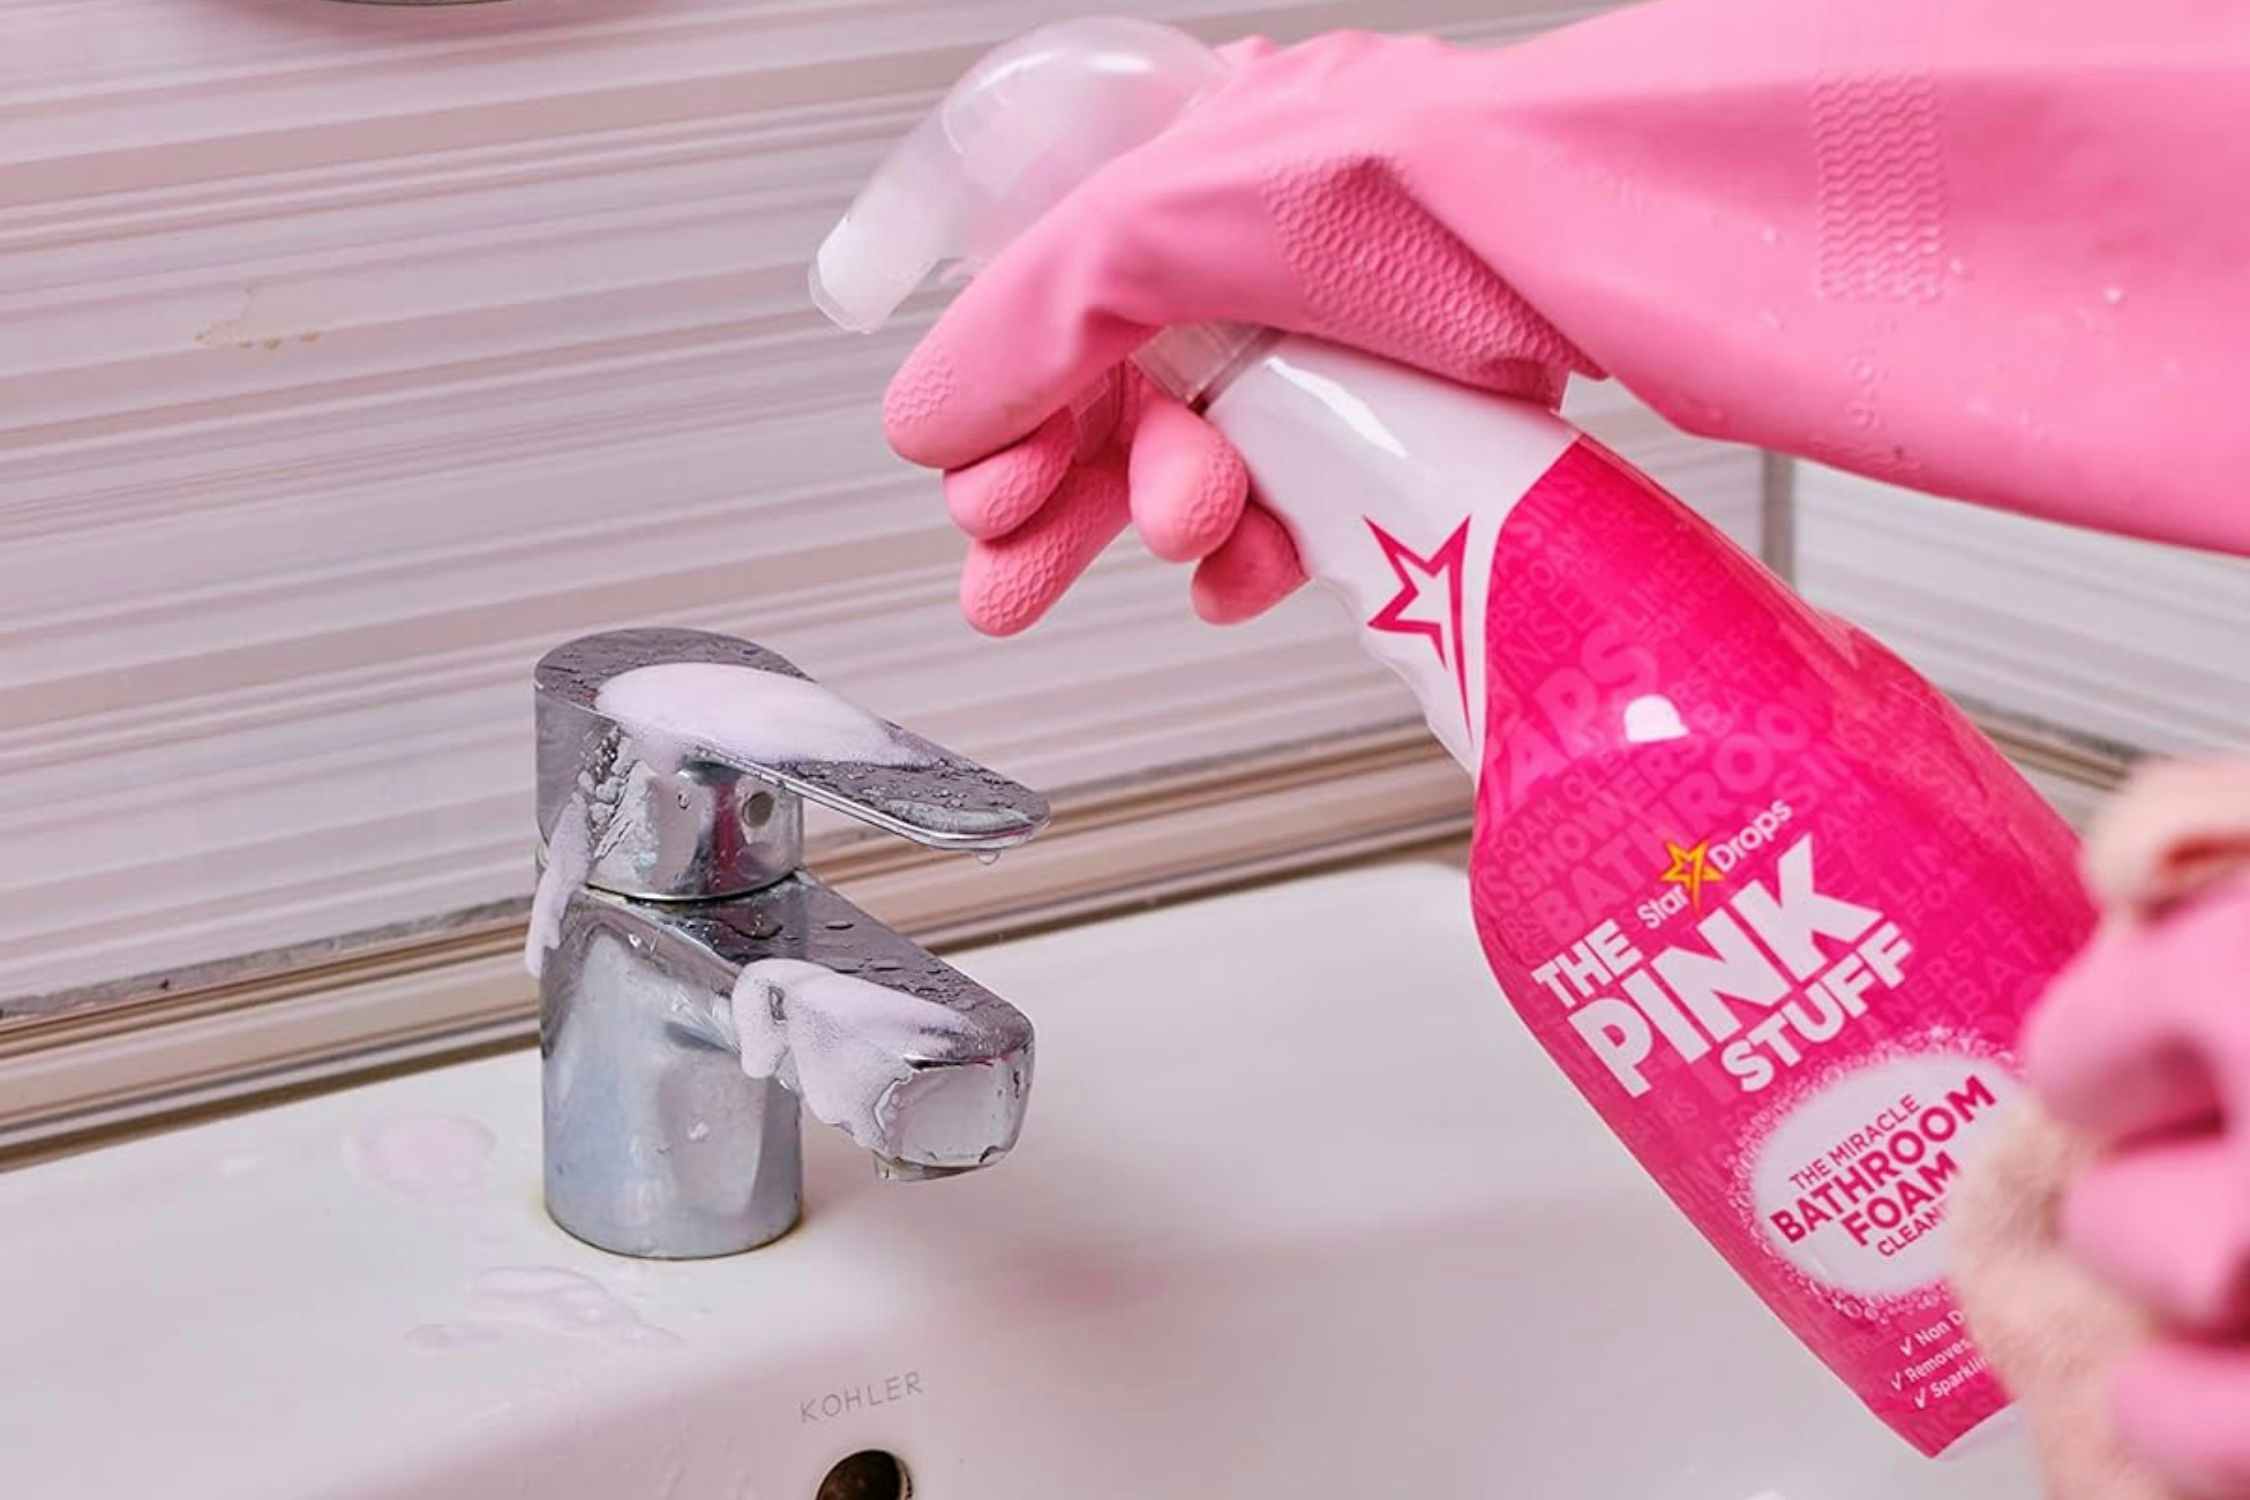 The Pink Stuff Bathroom Cleaner Spray, as Low as $5.67 on Amazon